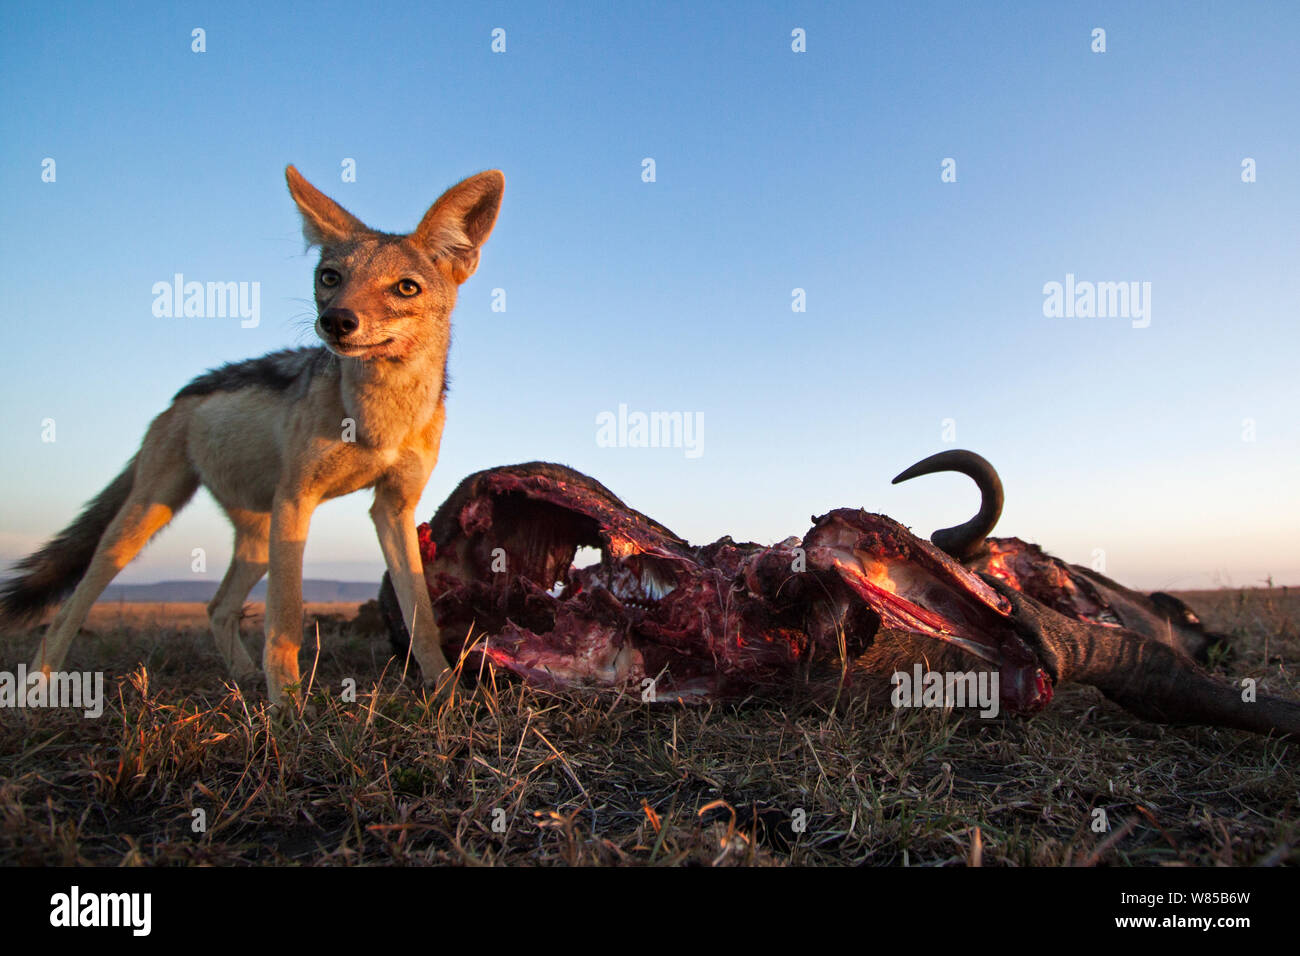 Black-backed jackal (Canis mesomelas) standing next to a wildebeest carcass. Masai Mara National Reserve, Kenya. Taken with remote wide angle camera. Stock Photo